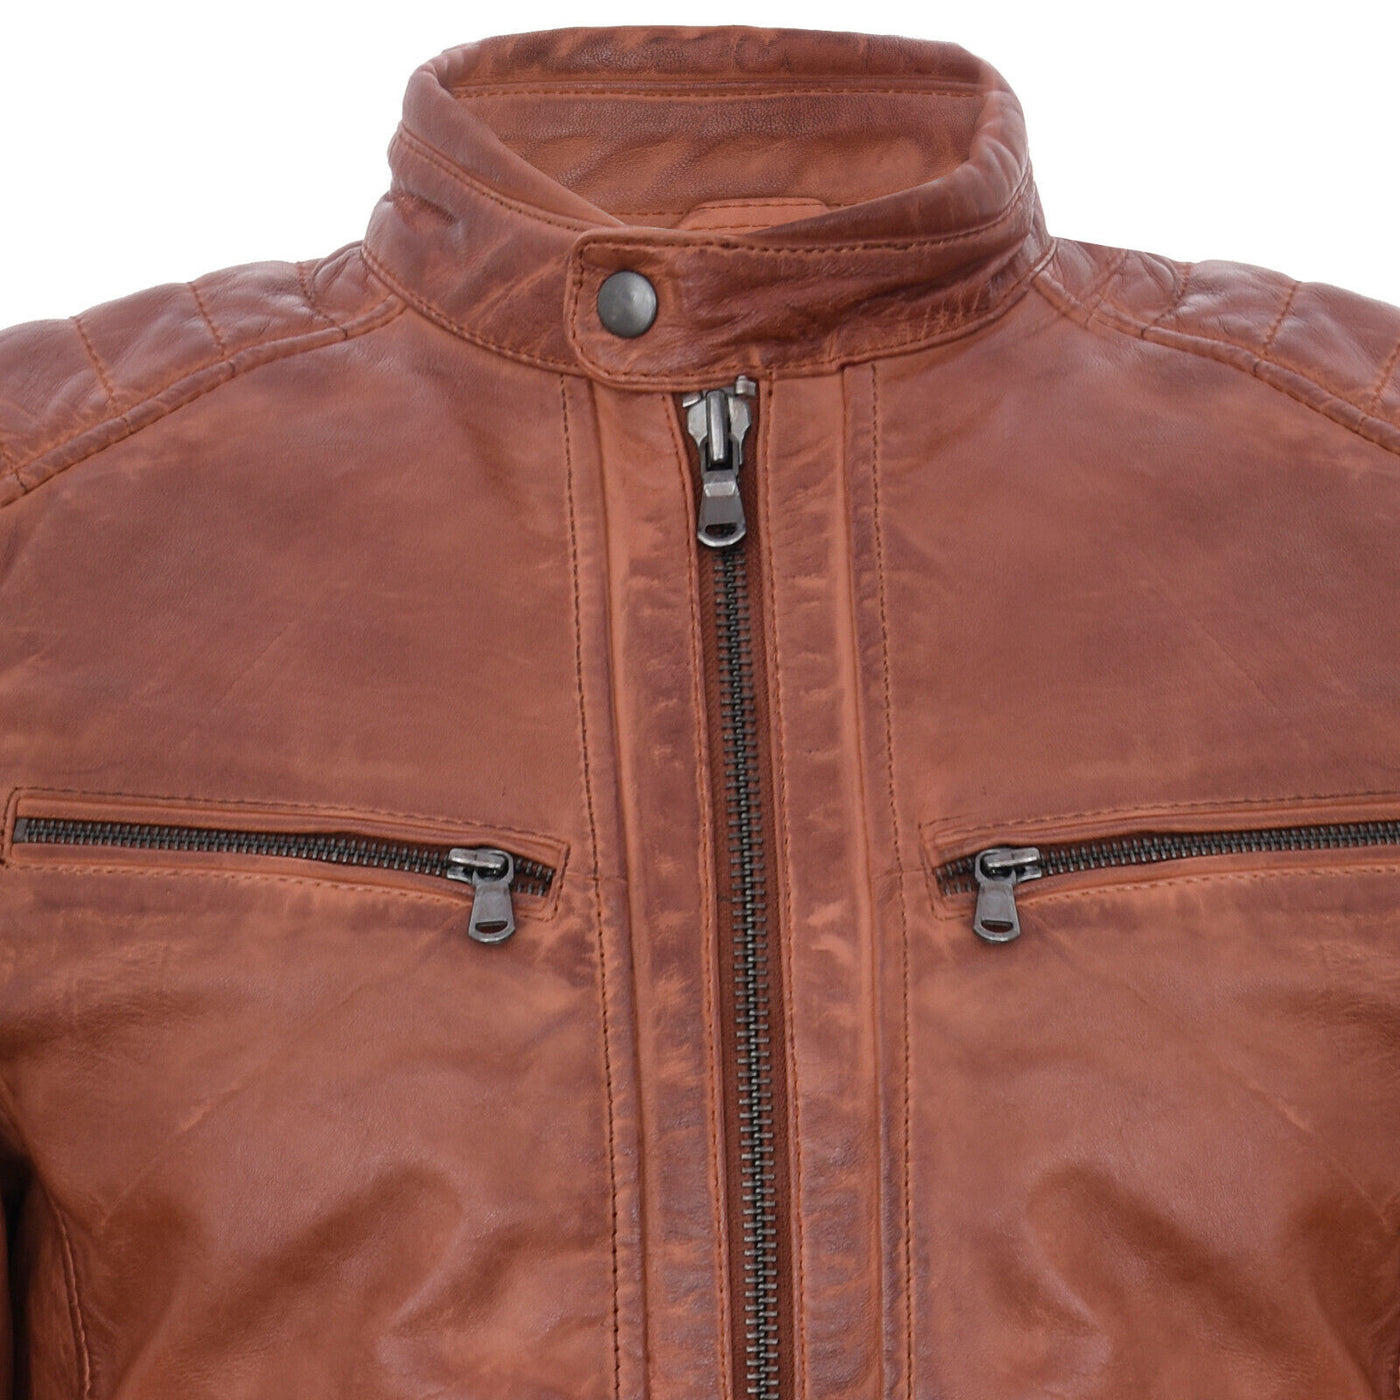 Mens Leather Vintage Quilted Racing Zipped Biker Jacket